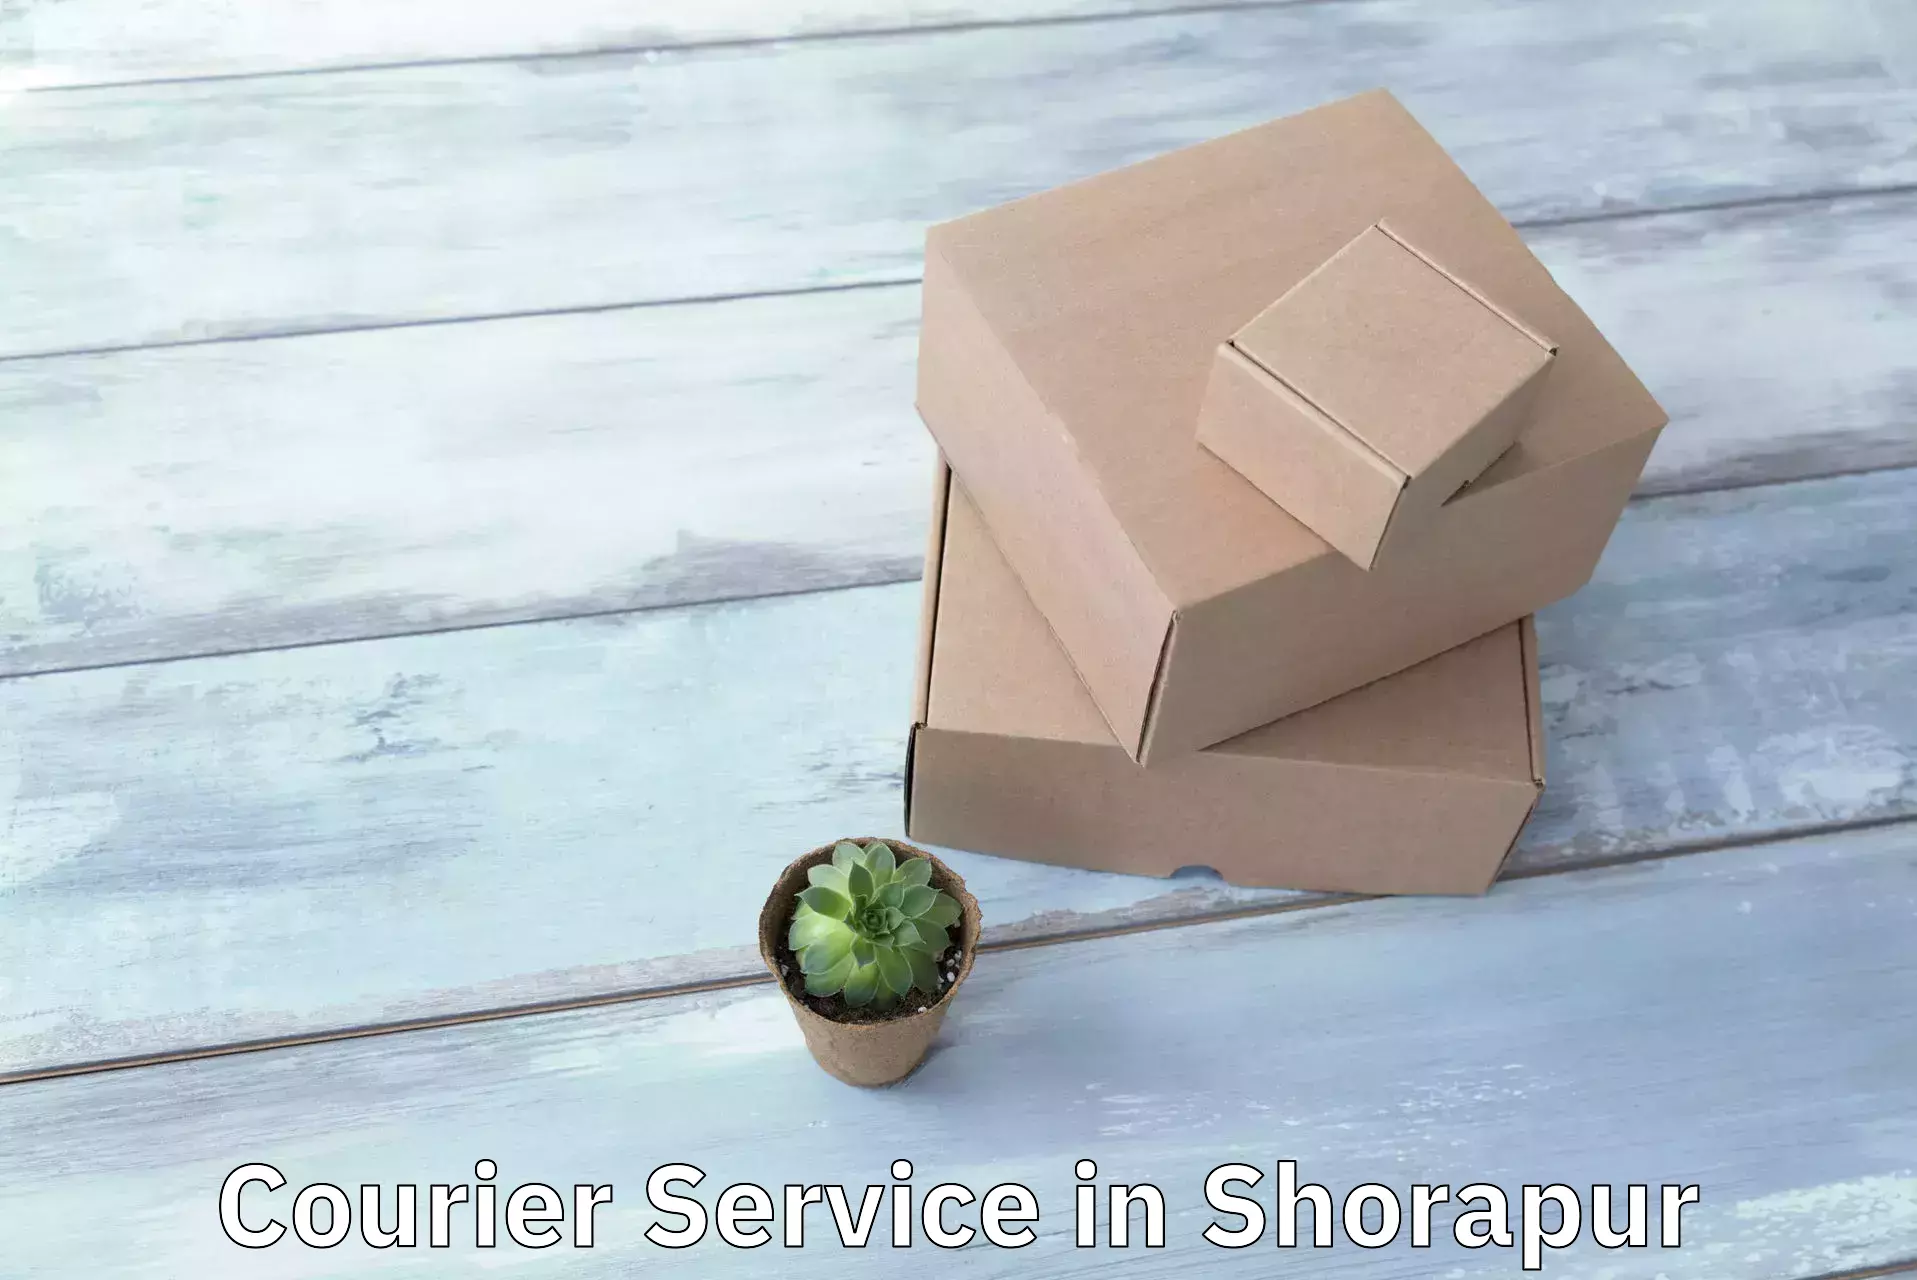 Expedited shipping methods in Shorapur